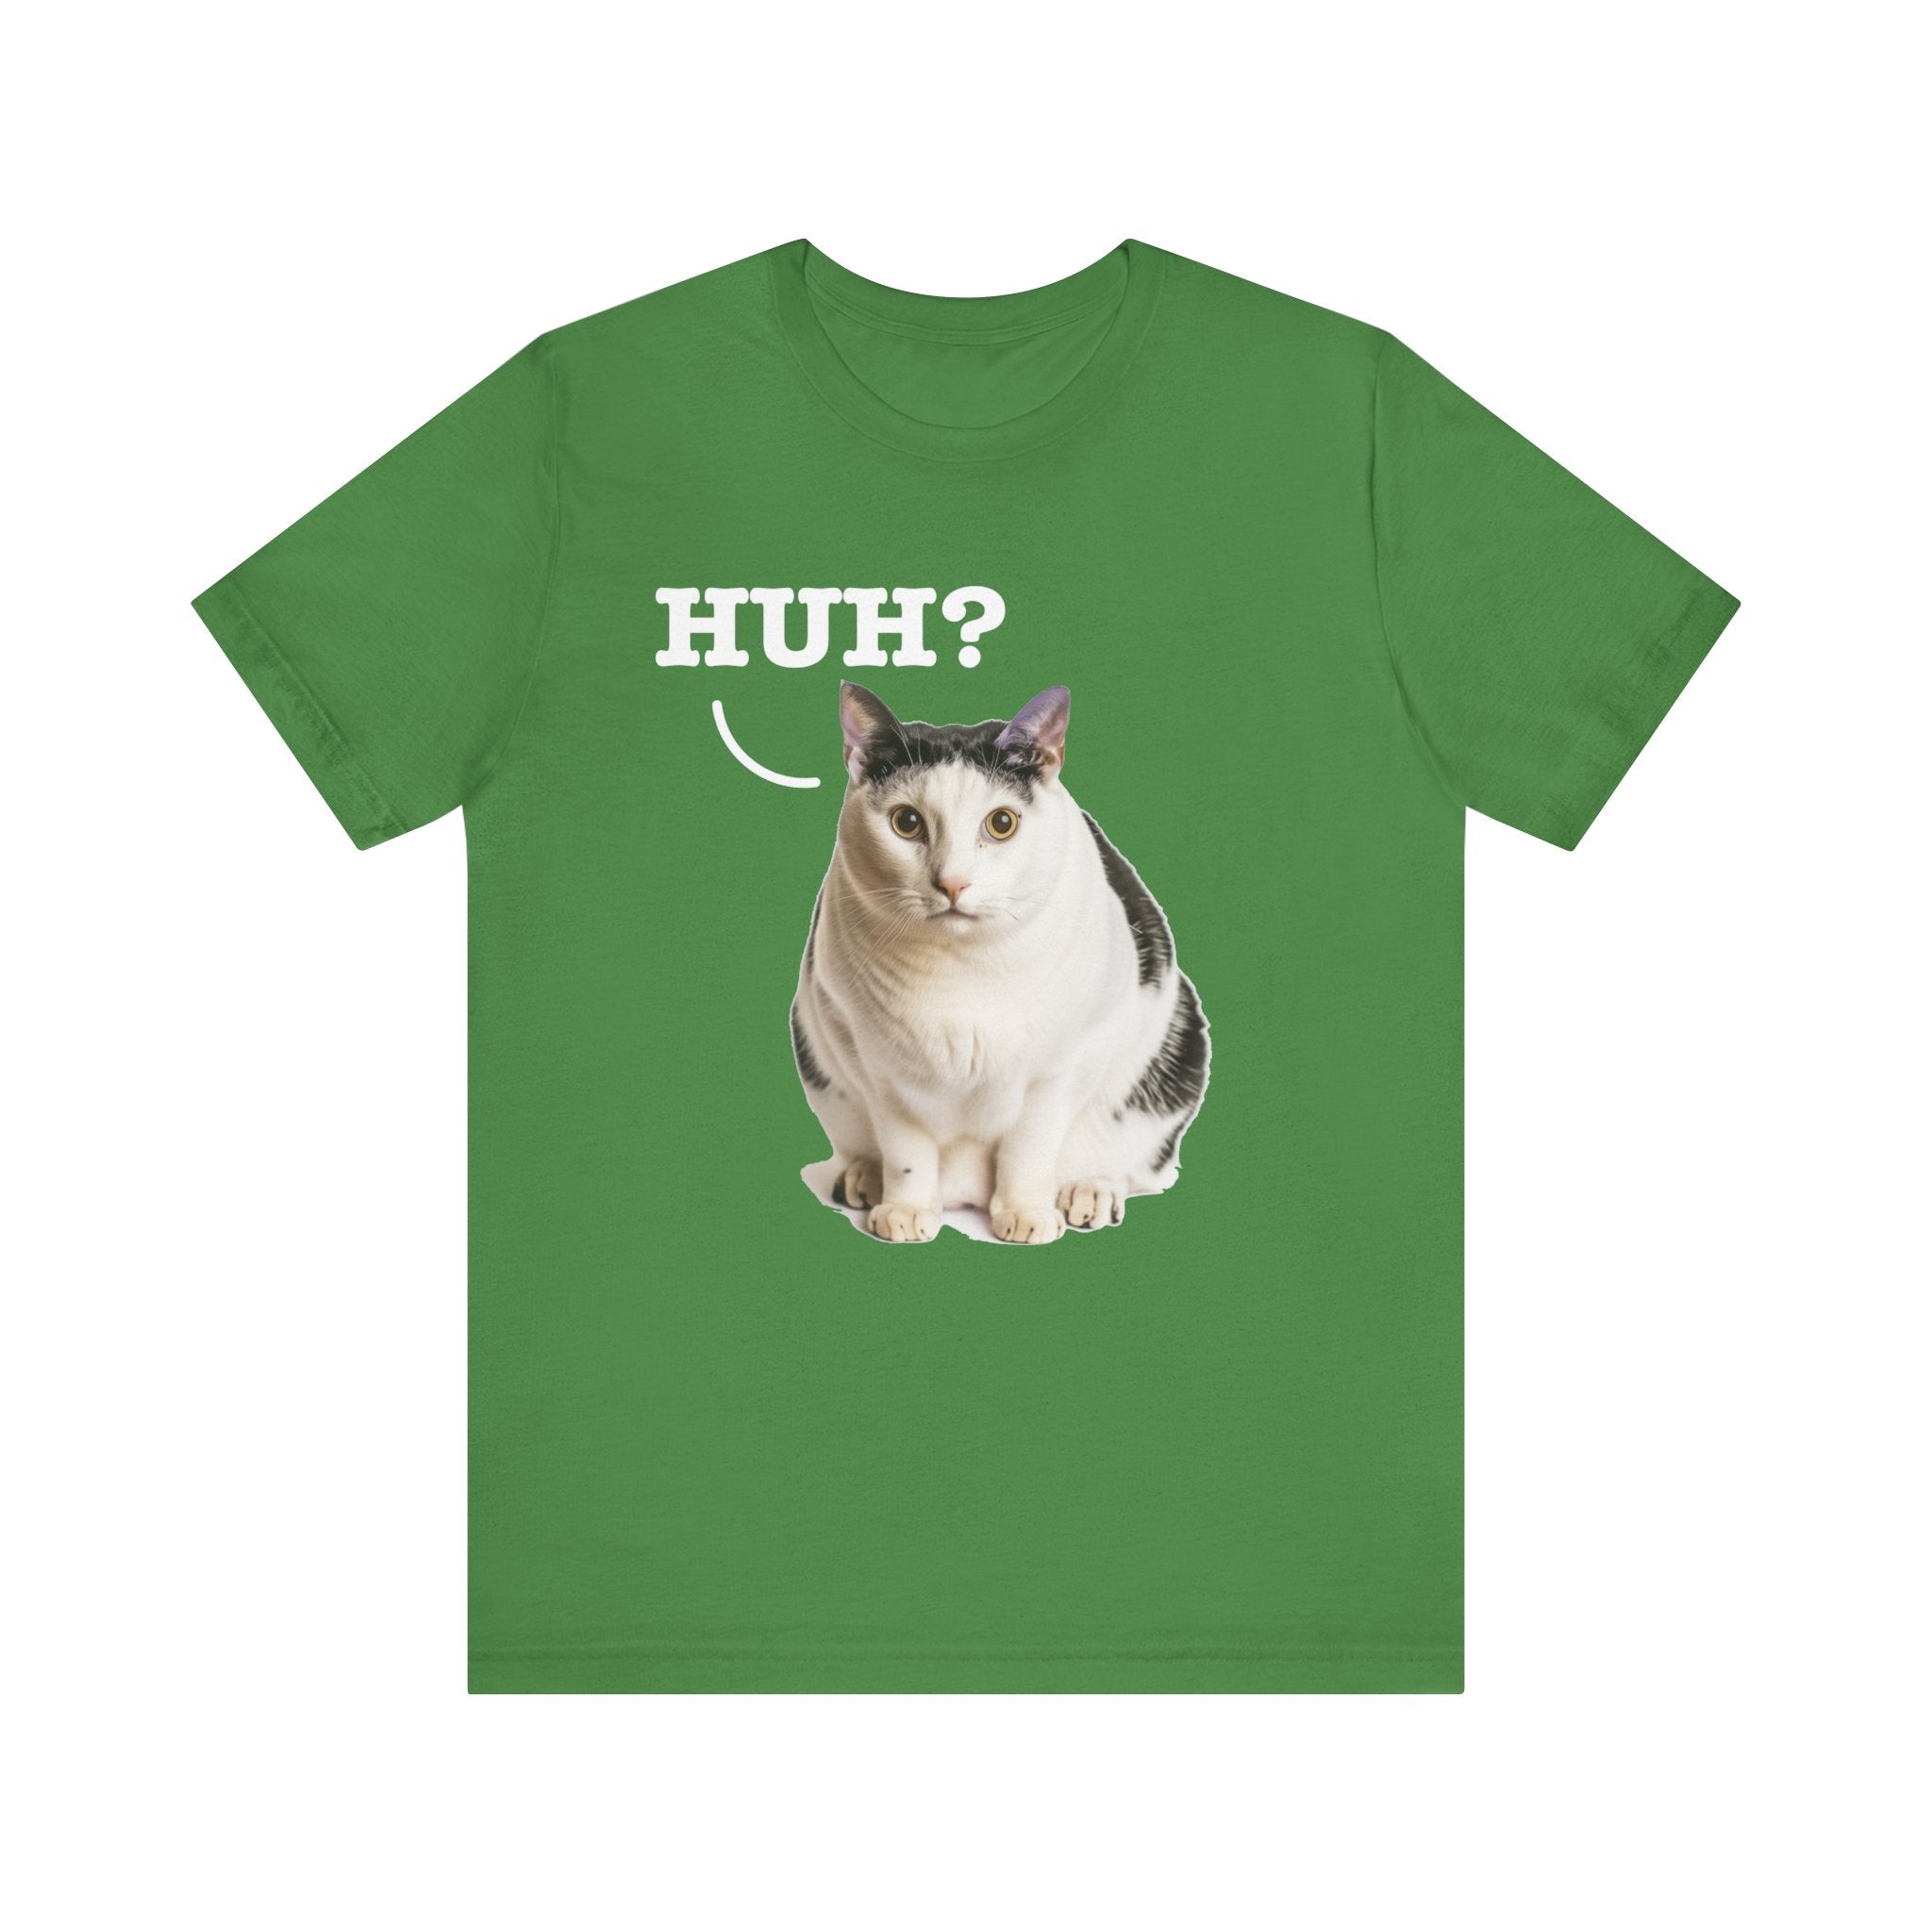 Huh? Cat Meme T-Shirt – Original Art Cat Lover Tee, Unique and Fun - Classic Unisex Jersey Tee, Soft Cotton, Perfect for Cat Lovers